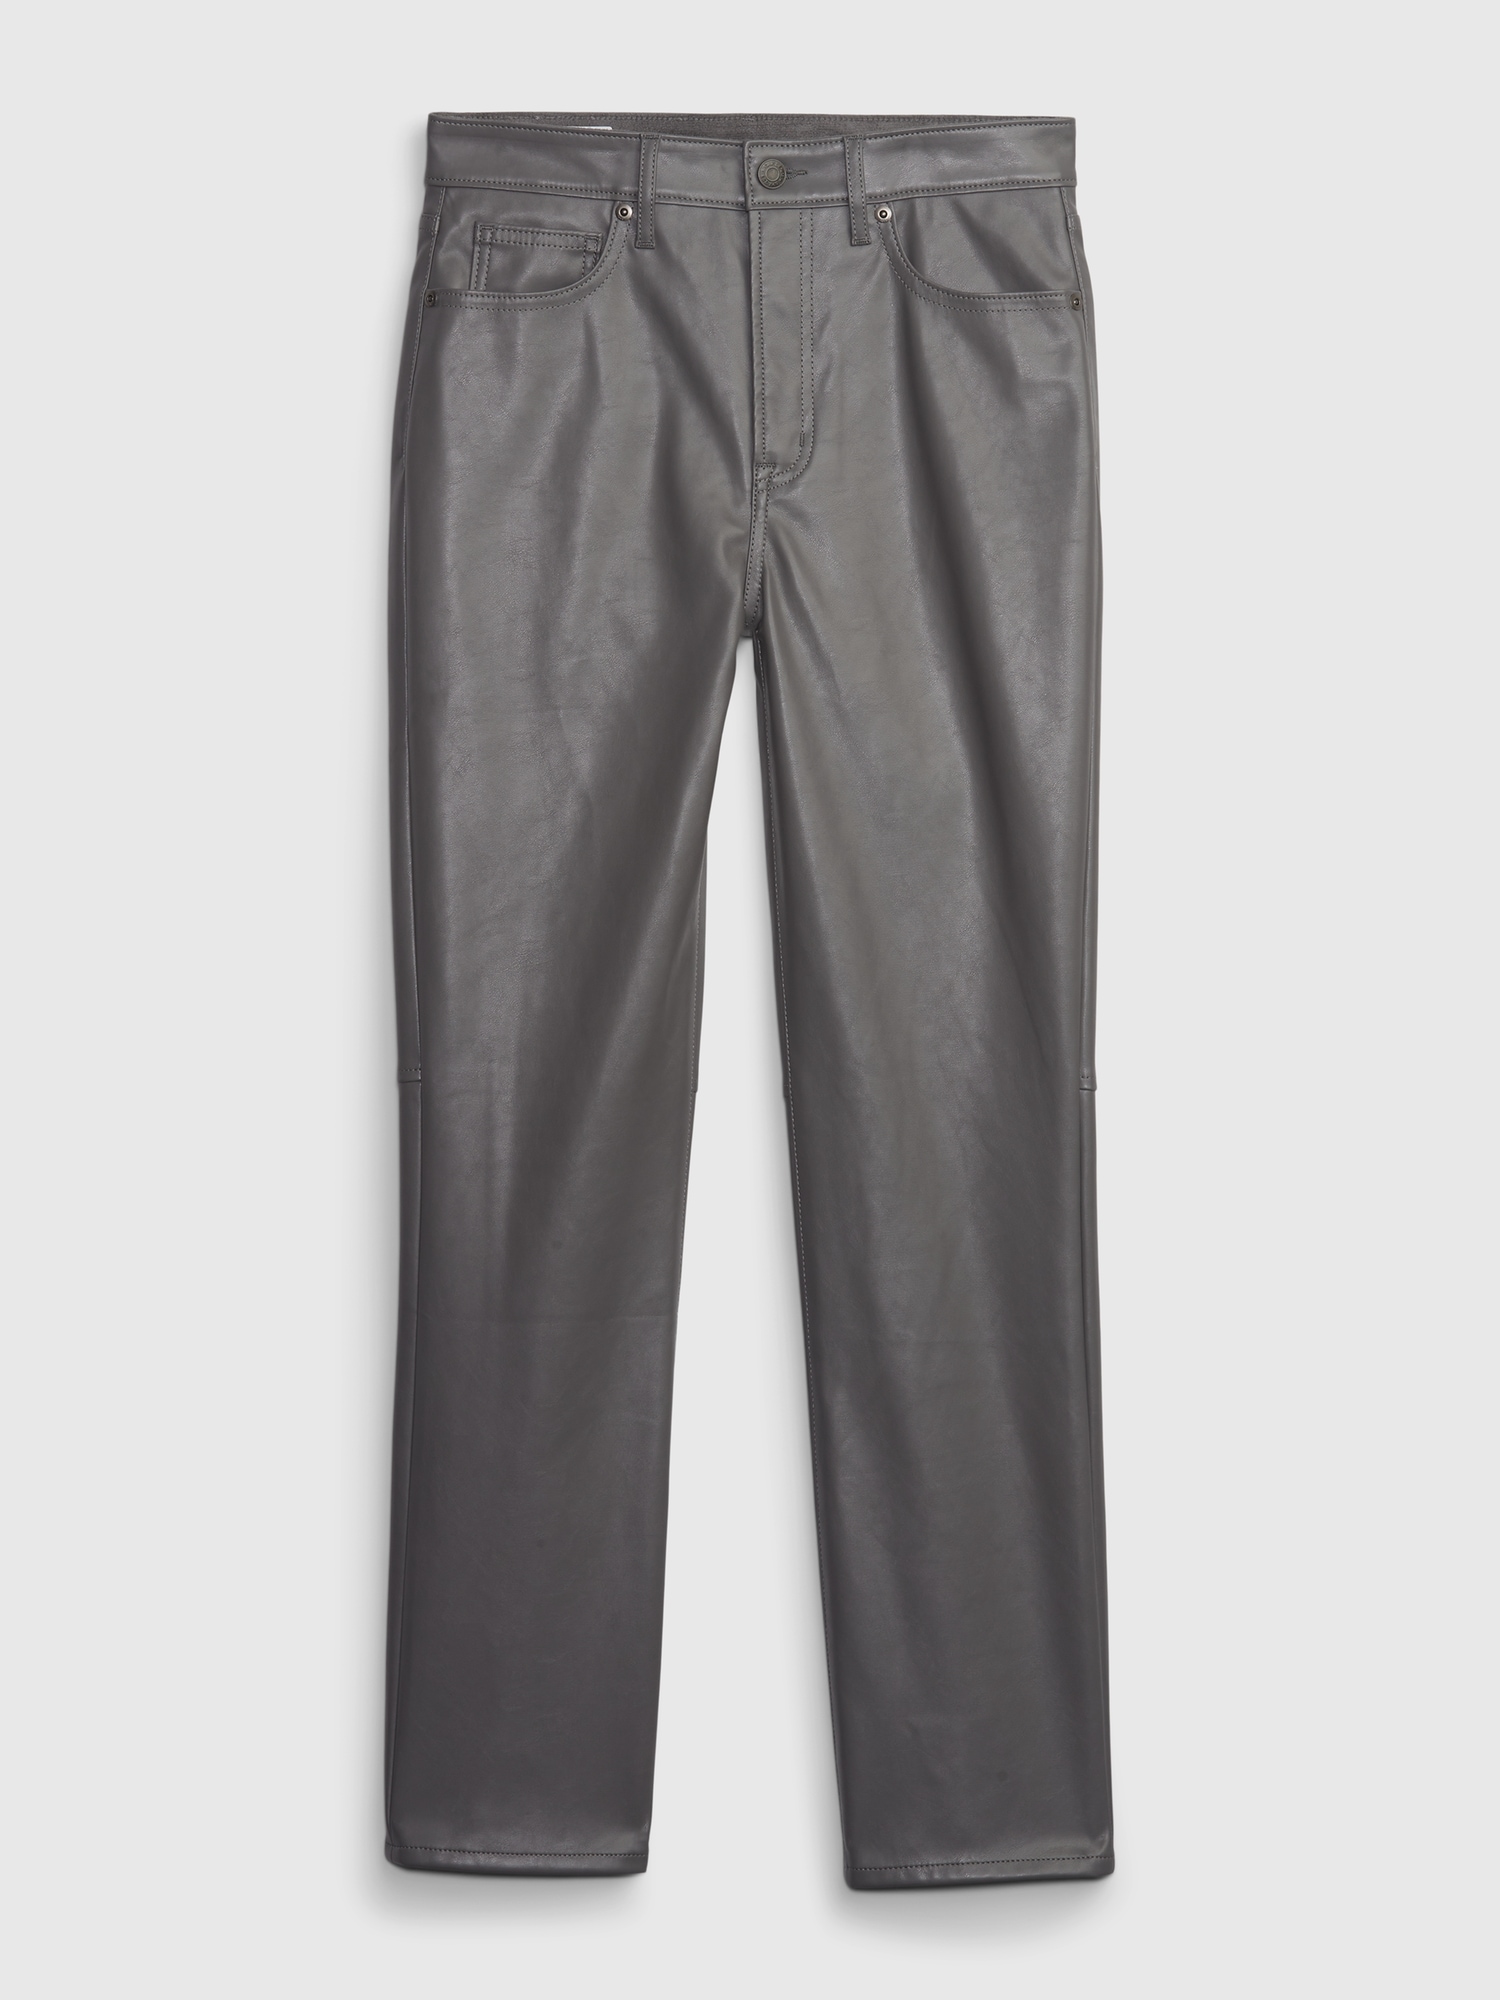 Gap black leather pants from  look great paired with the white